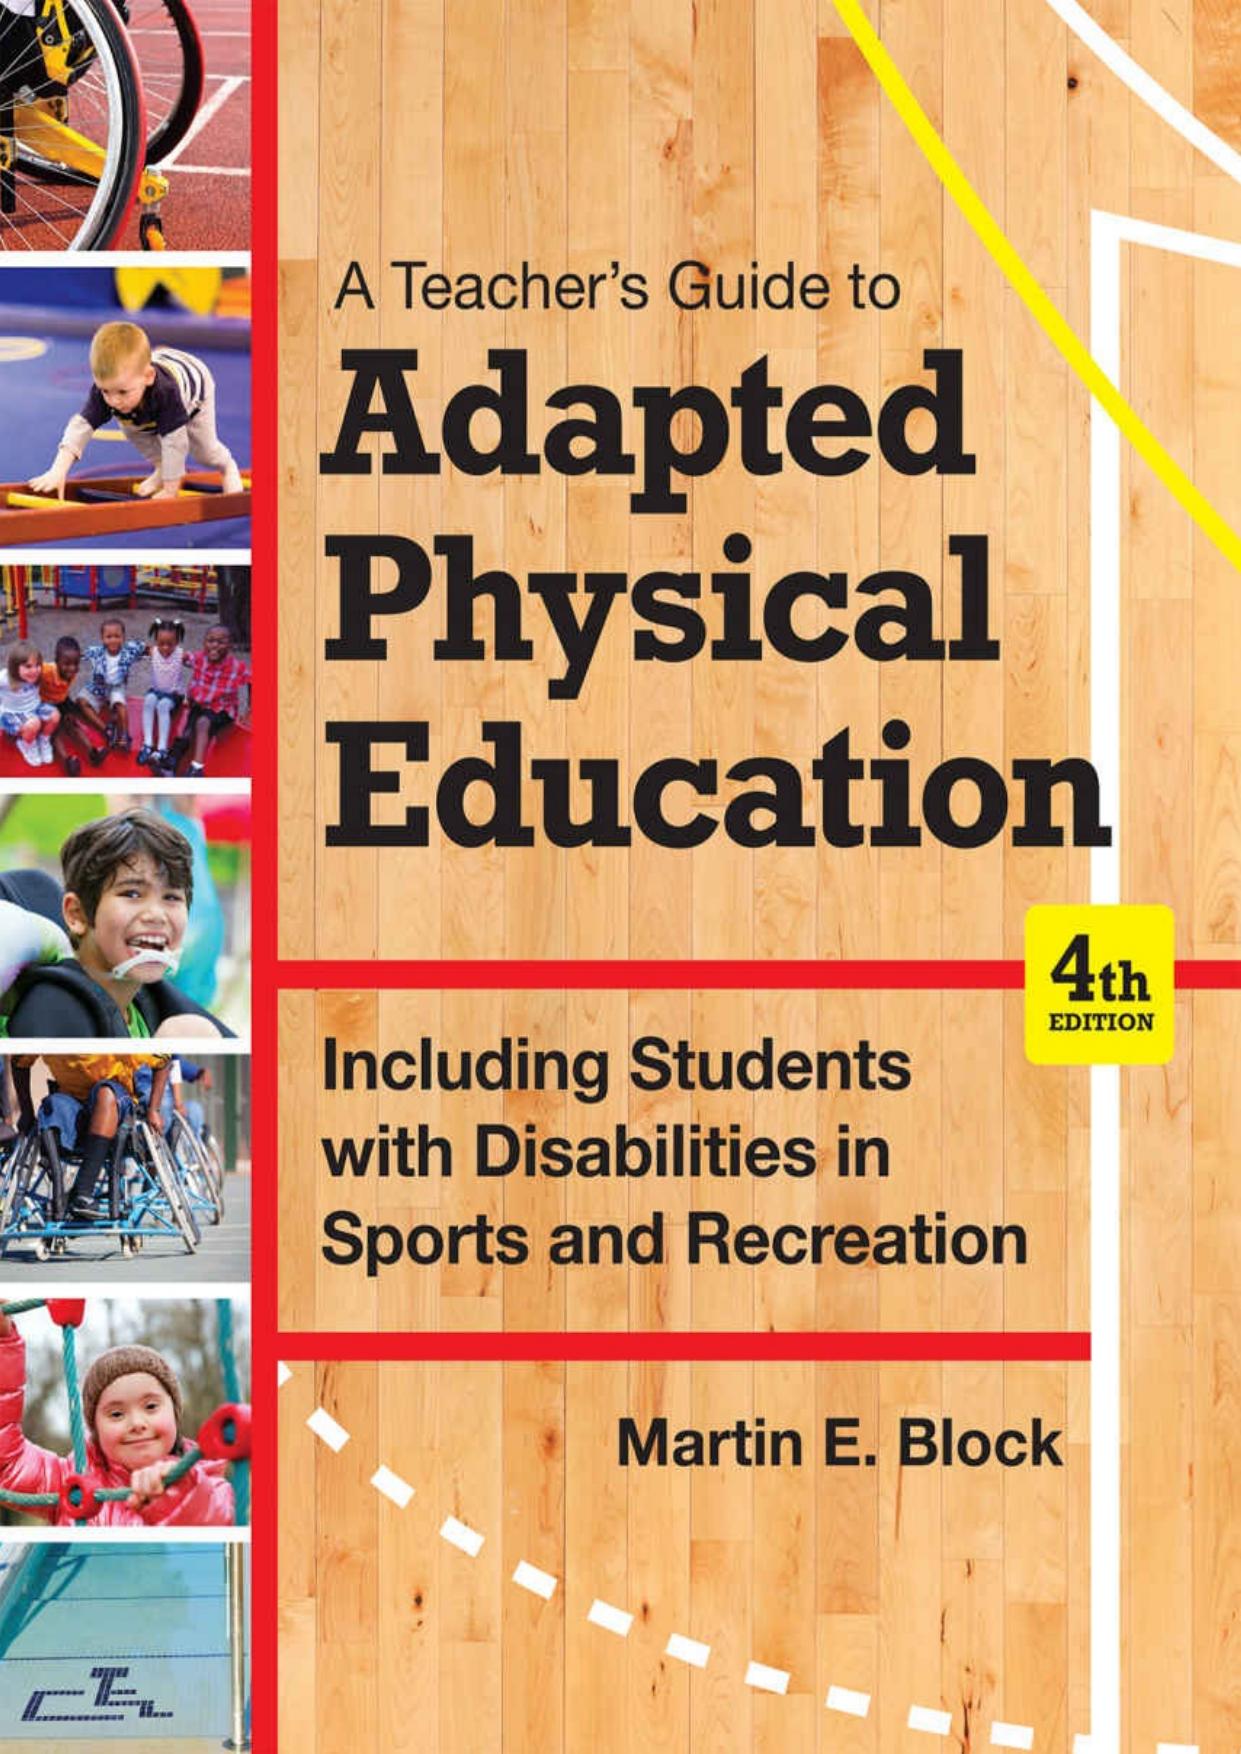 A Teacher's Guide to Adapted Physical Education: Including Students With Disabilities in Sports and Recreation, Fourth Edition